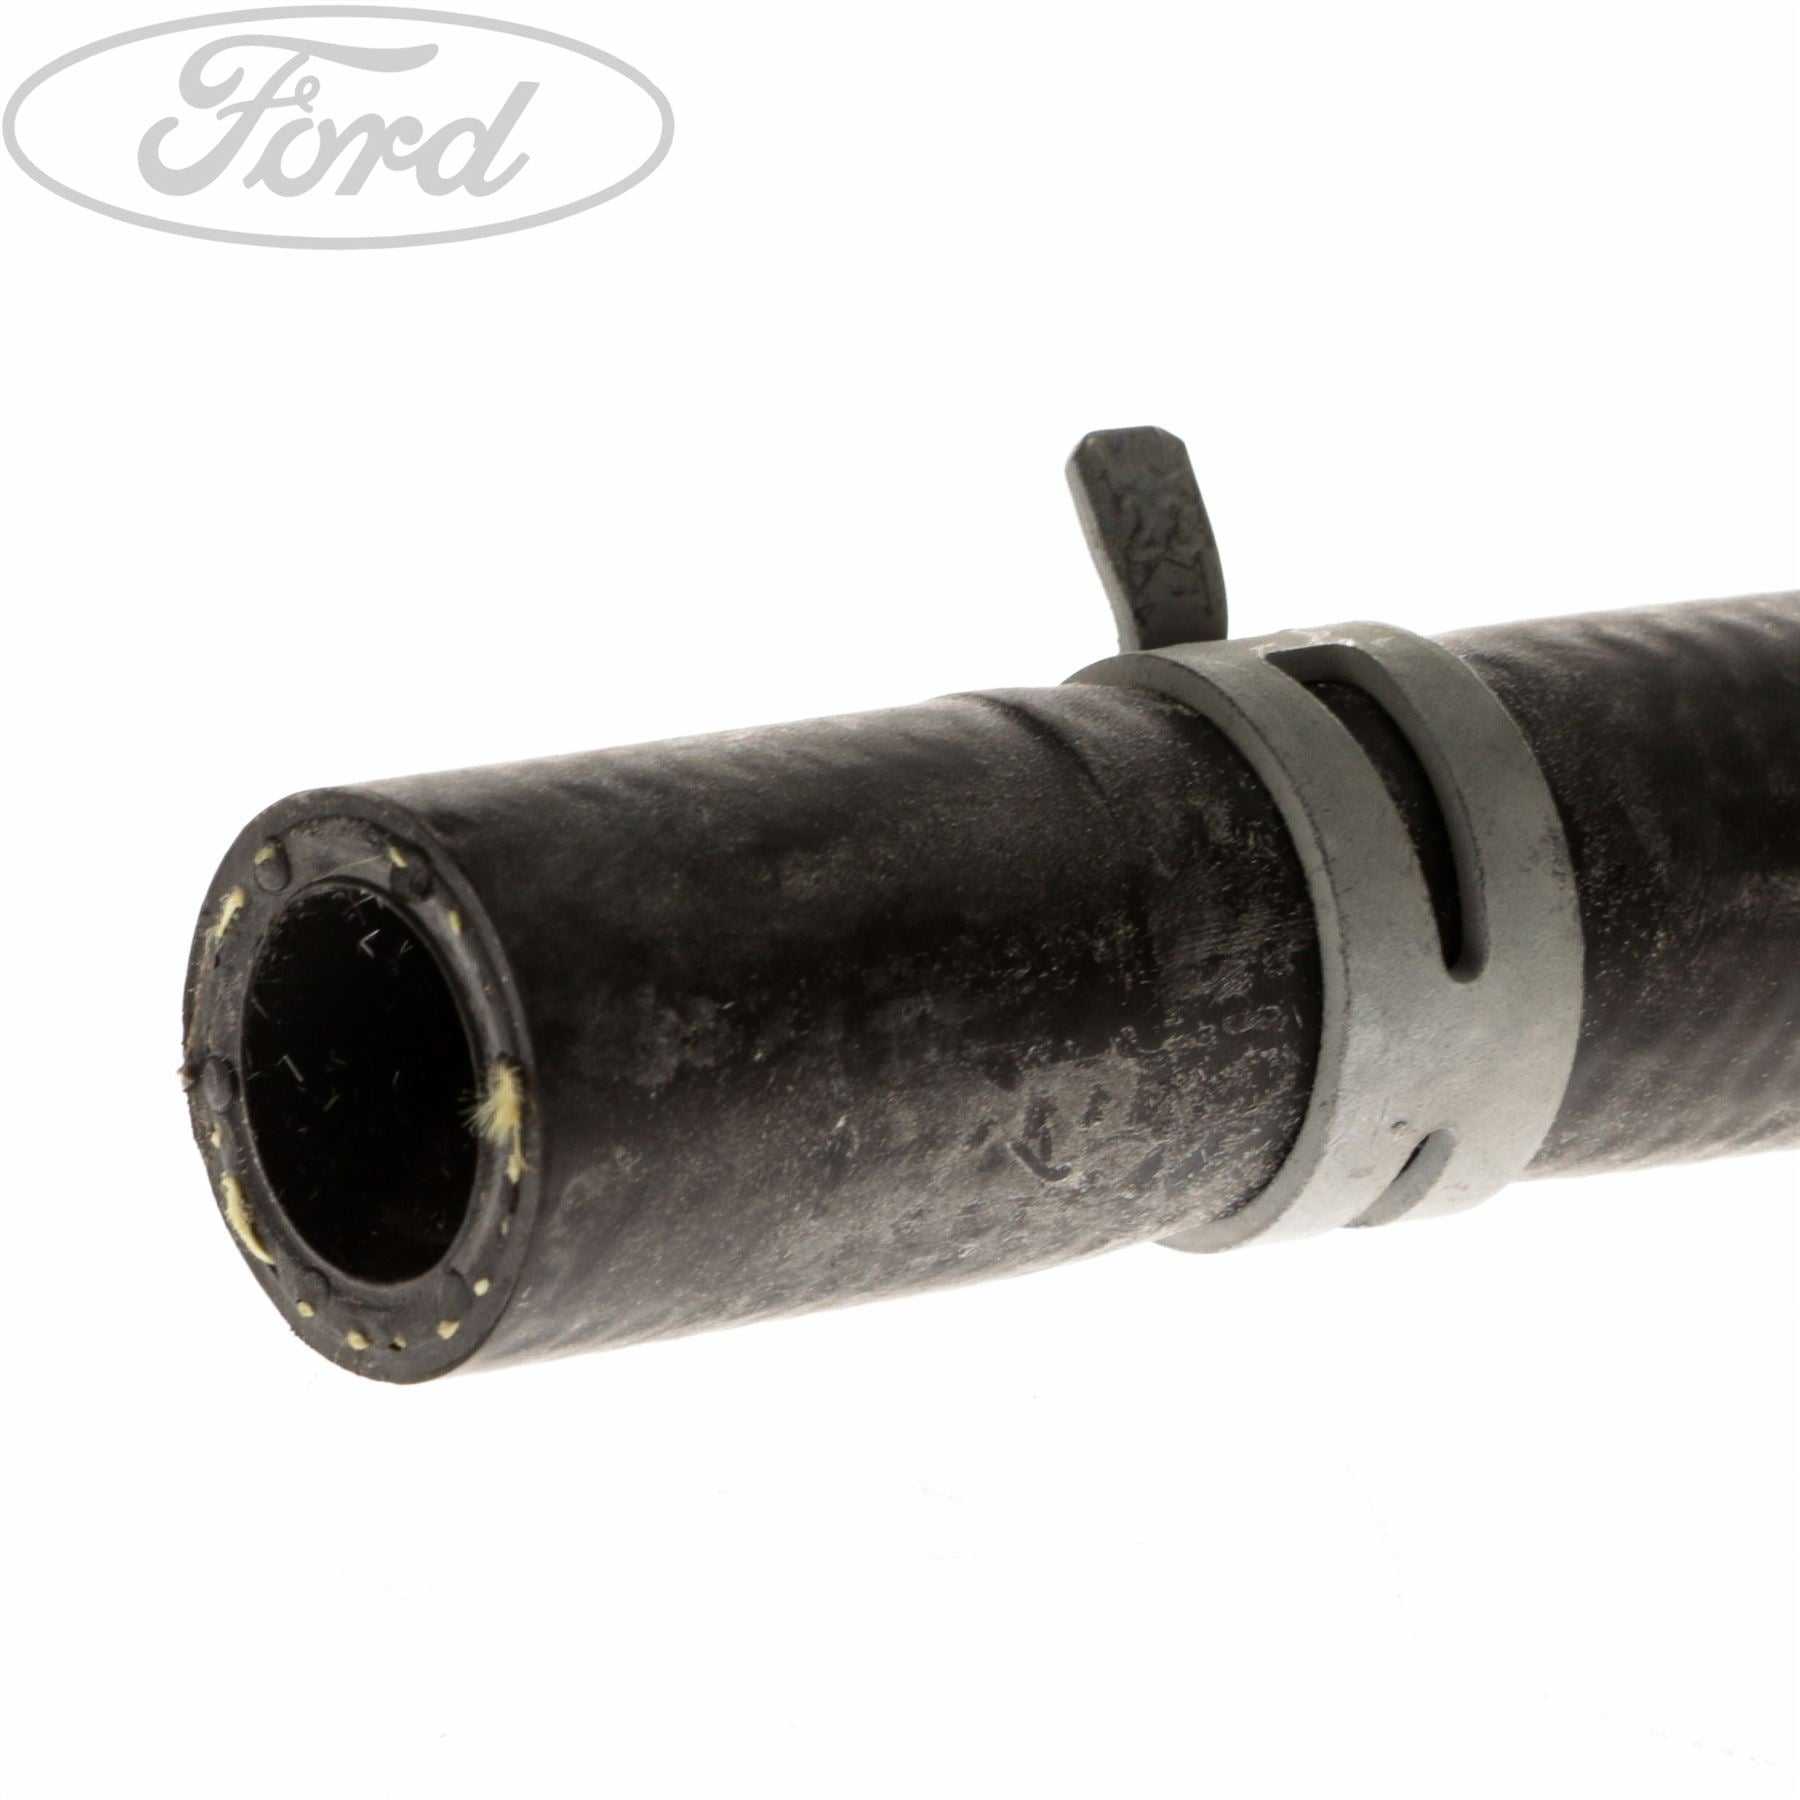 Ford, THERMOSTAT HOUSING & HOSE